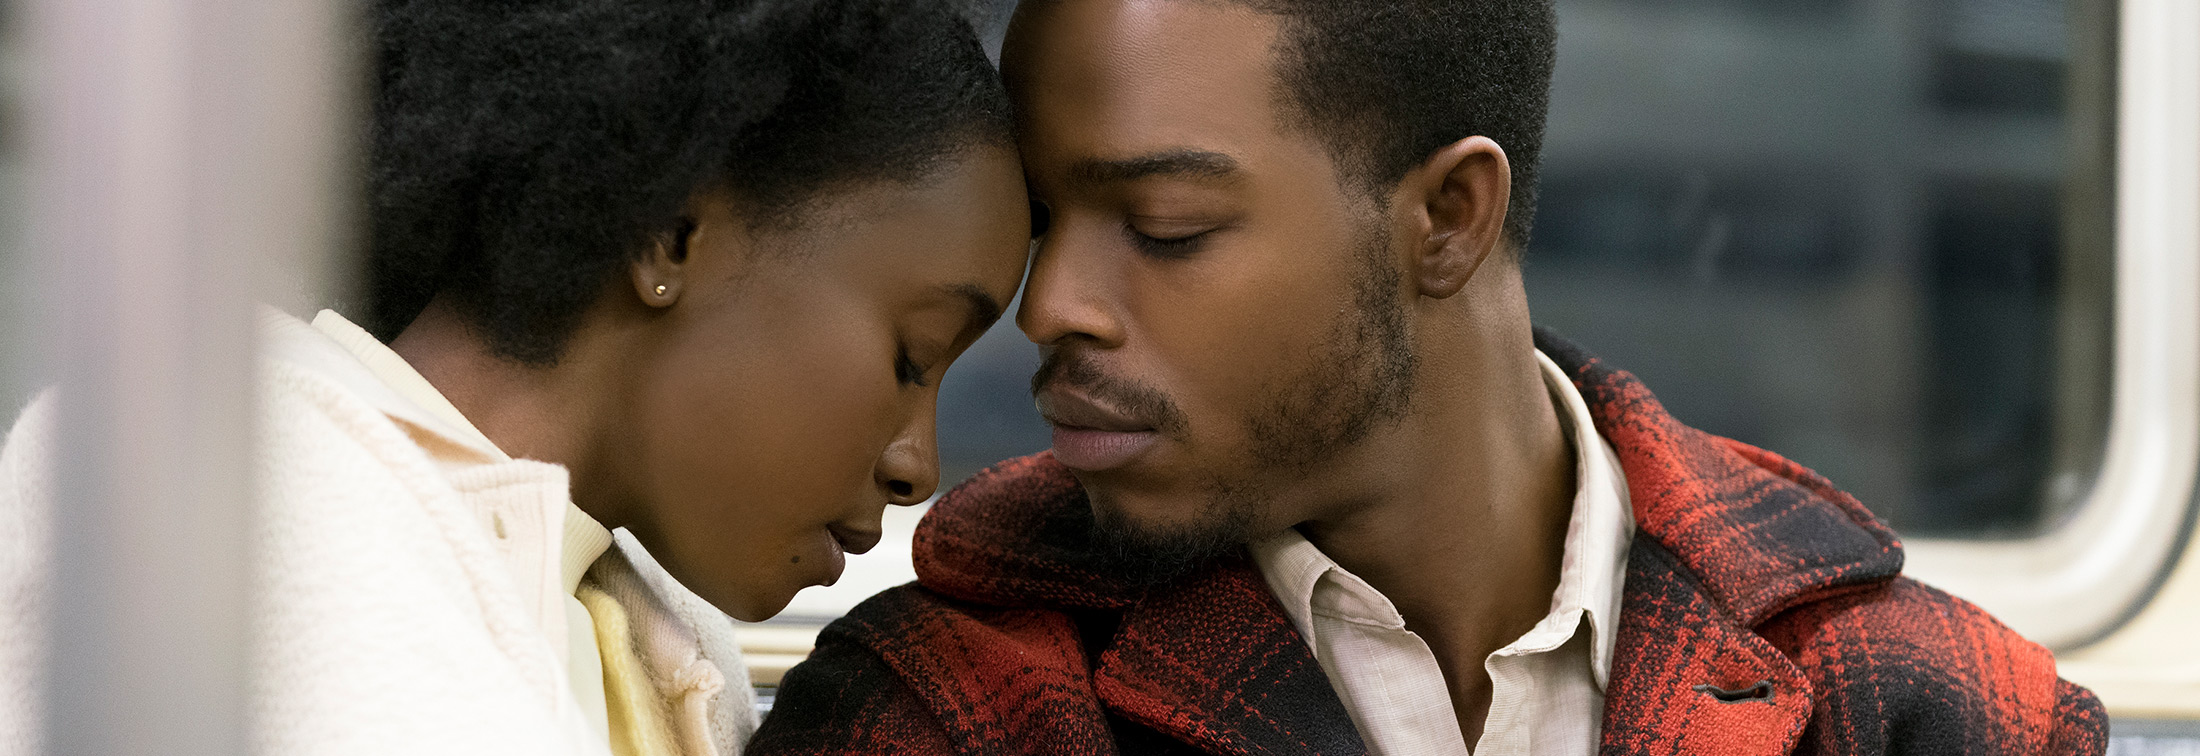 If Beale Street Could Talk - Love is a many splendid thing indeed